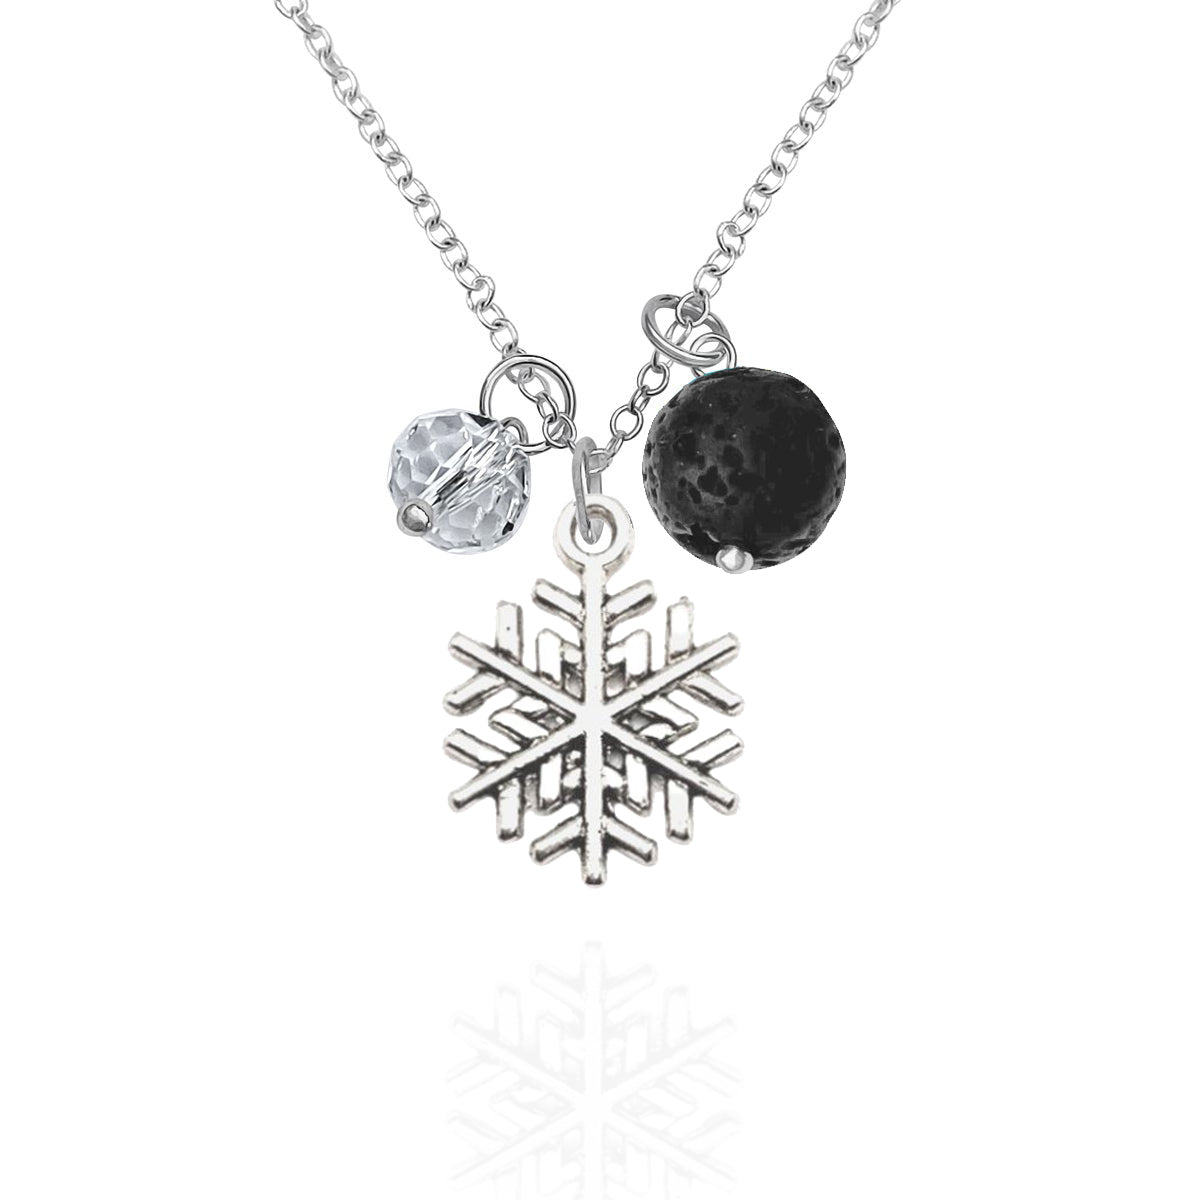 Holiday Harmony Necklace with Snowflake, Lava Stone and Clear Crystal for Aroma Therapy and Chi. The perfect piece of jewelry to bring you into the Holiday Spirit.  According to an ancient Zen proverb “A snowflake never falls in the wrong place.” The beauty of snowflakes, they have hypnotizing silhouettes.